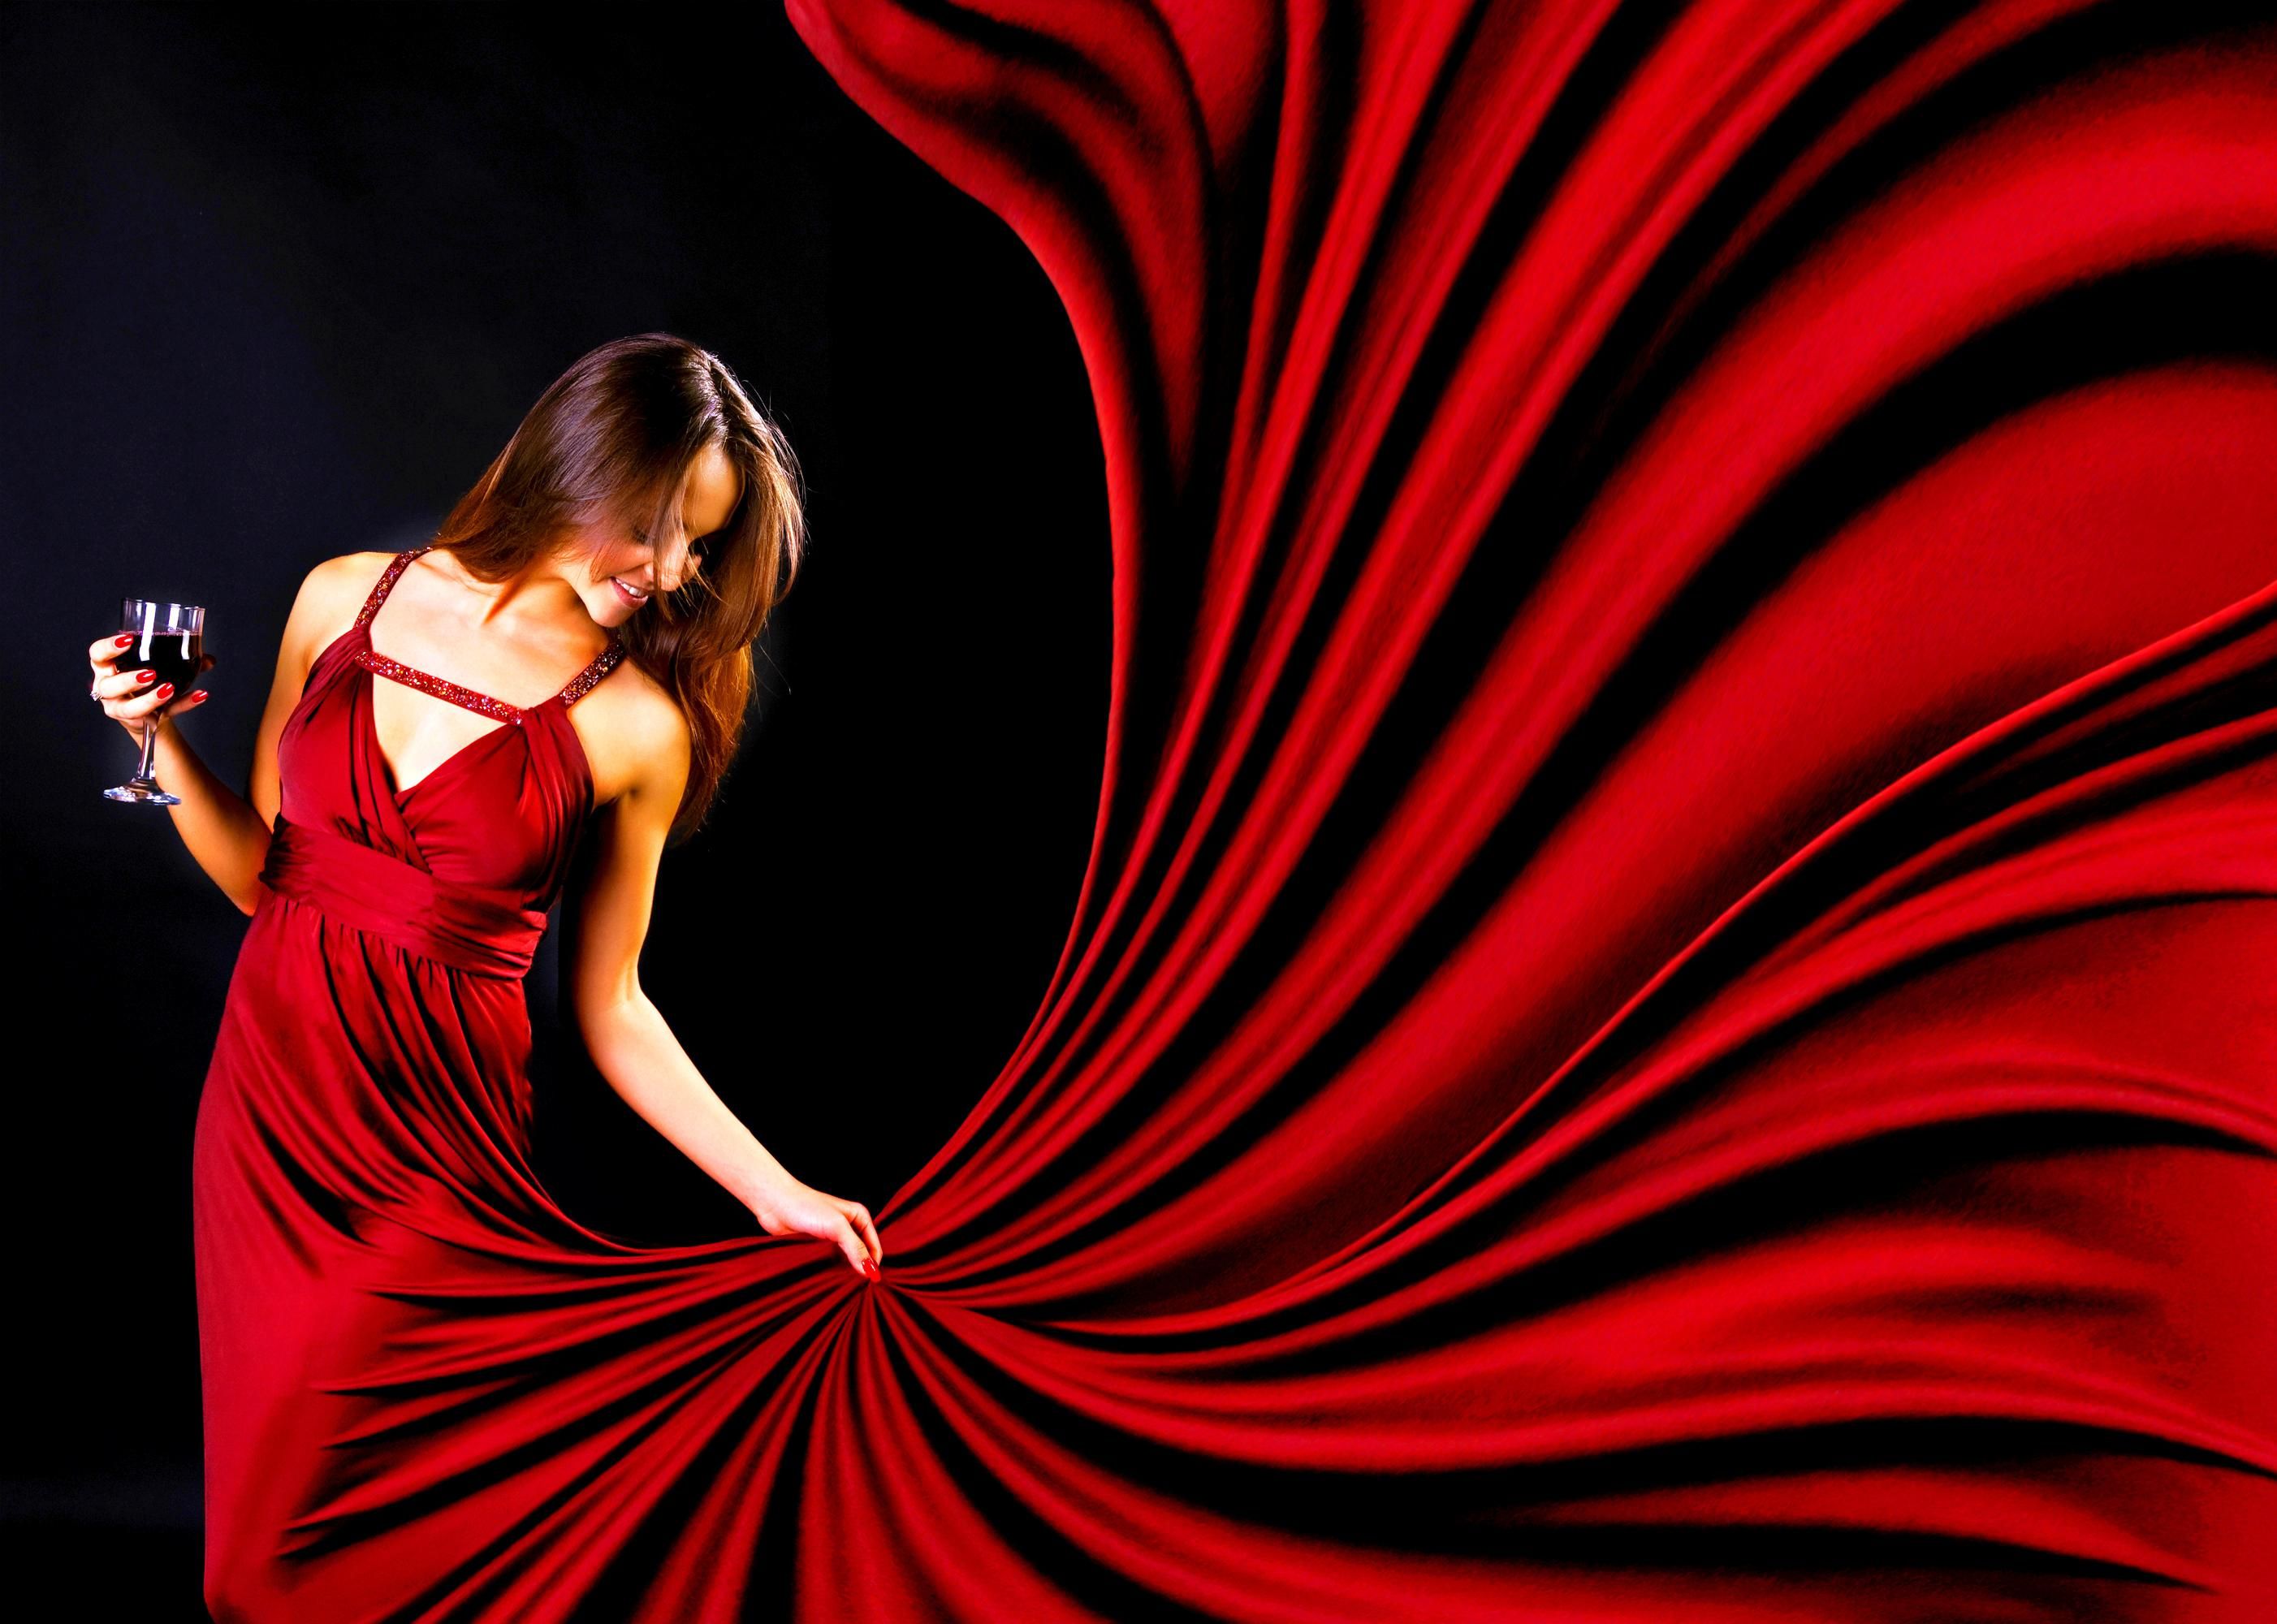 Glamour lady in red - (#103238) - High Quality and Resolution ...